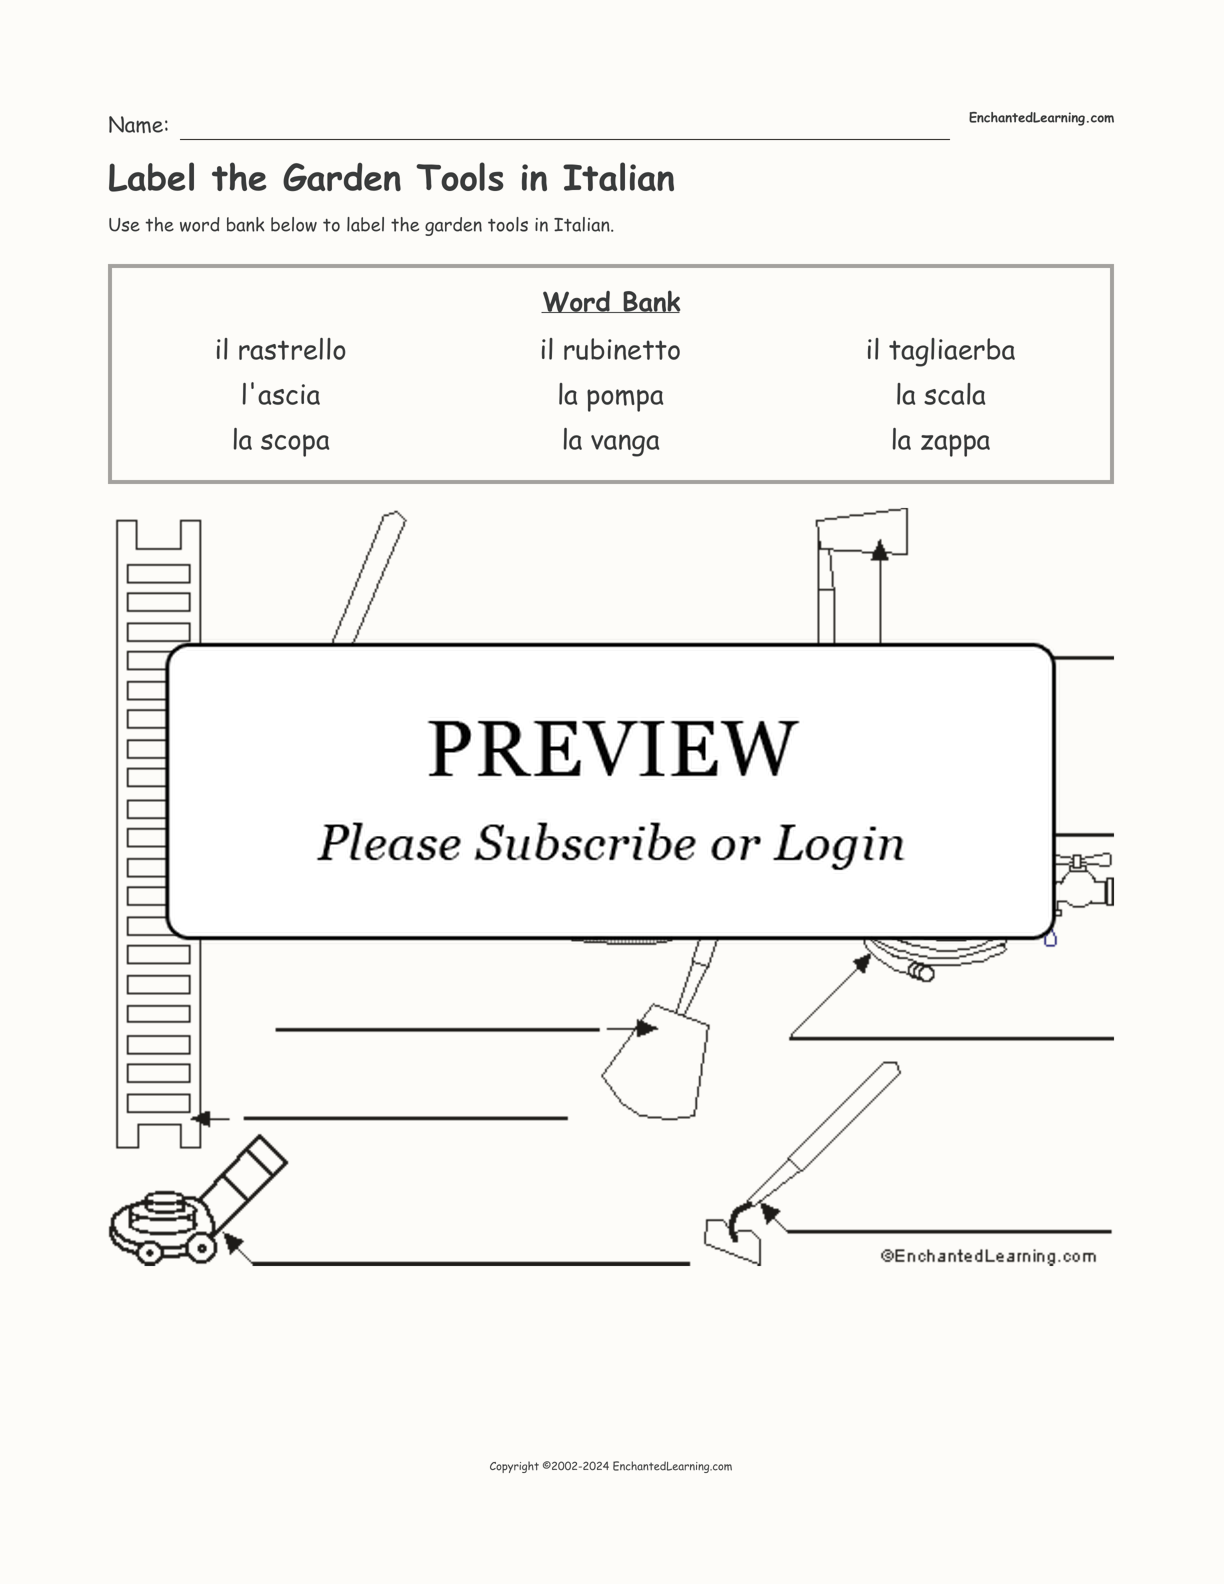 Label the Garden Tools in Italian interactive worksheet page 1